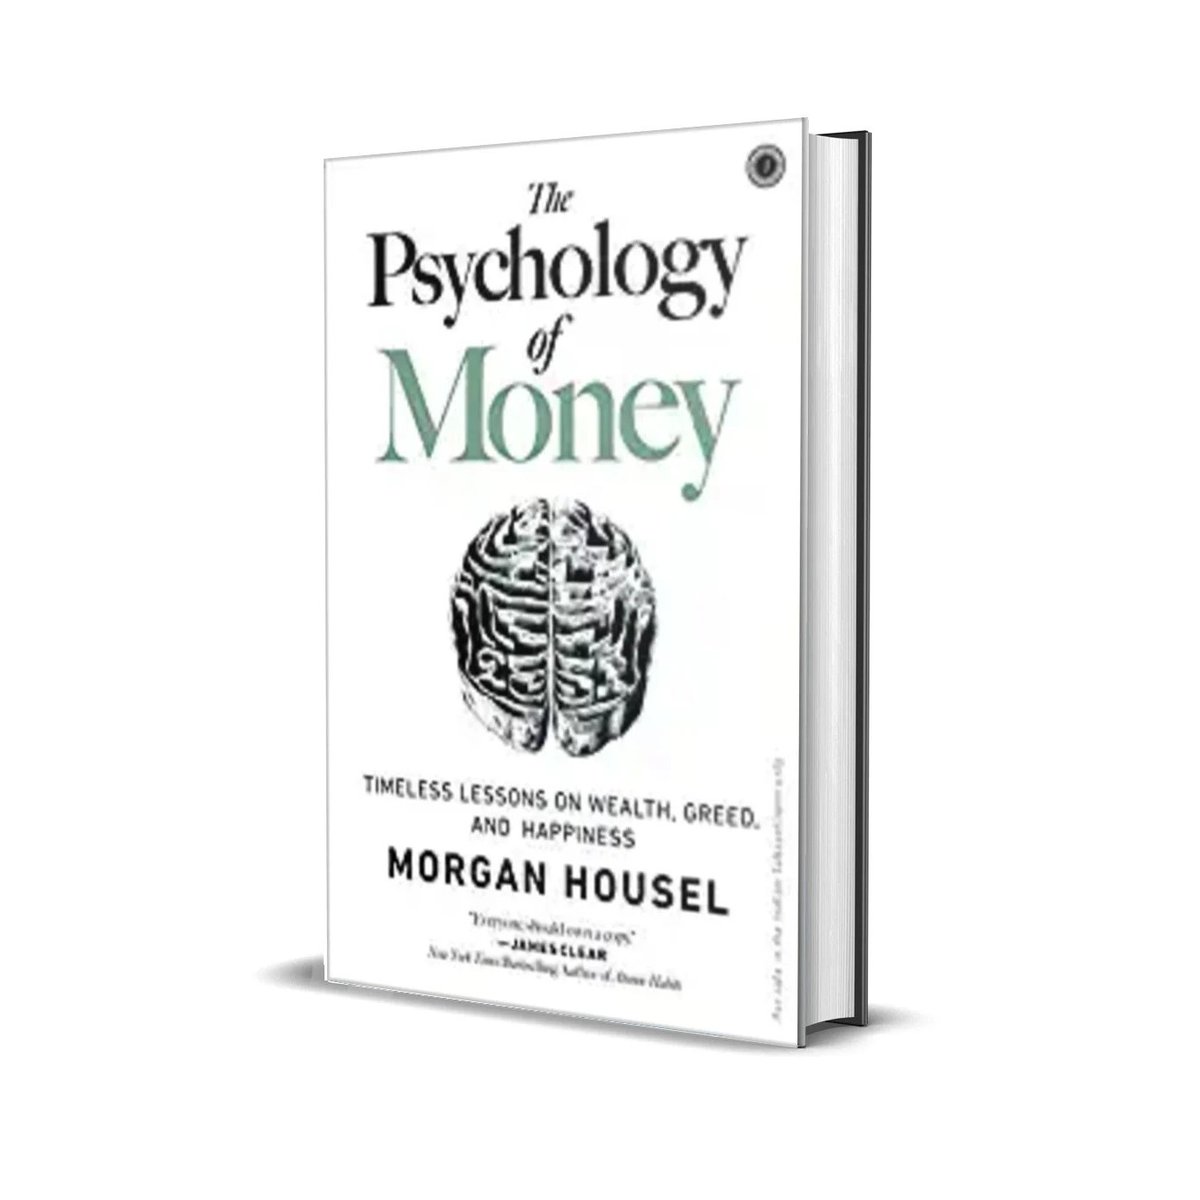 Imagine your wealth, your hard-earned savings, slipping through your fingers like sand. Today, I want to share with you the 7 keys to the Psychology Of Money, inspired by Morgan Housel's book.

1. Wealth ≠ Money: Money is how we transfer time and wealth. But wealth is what we…